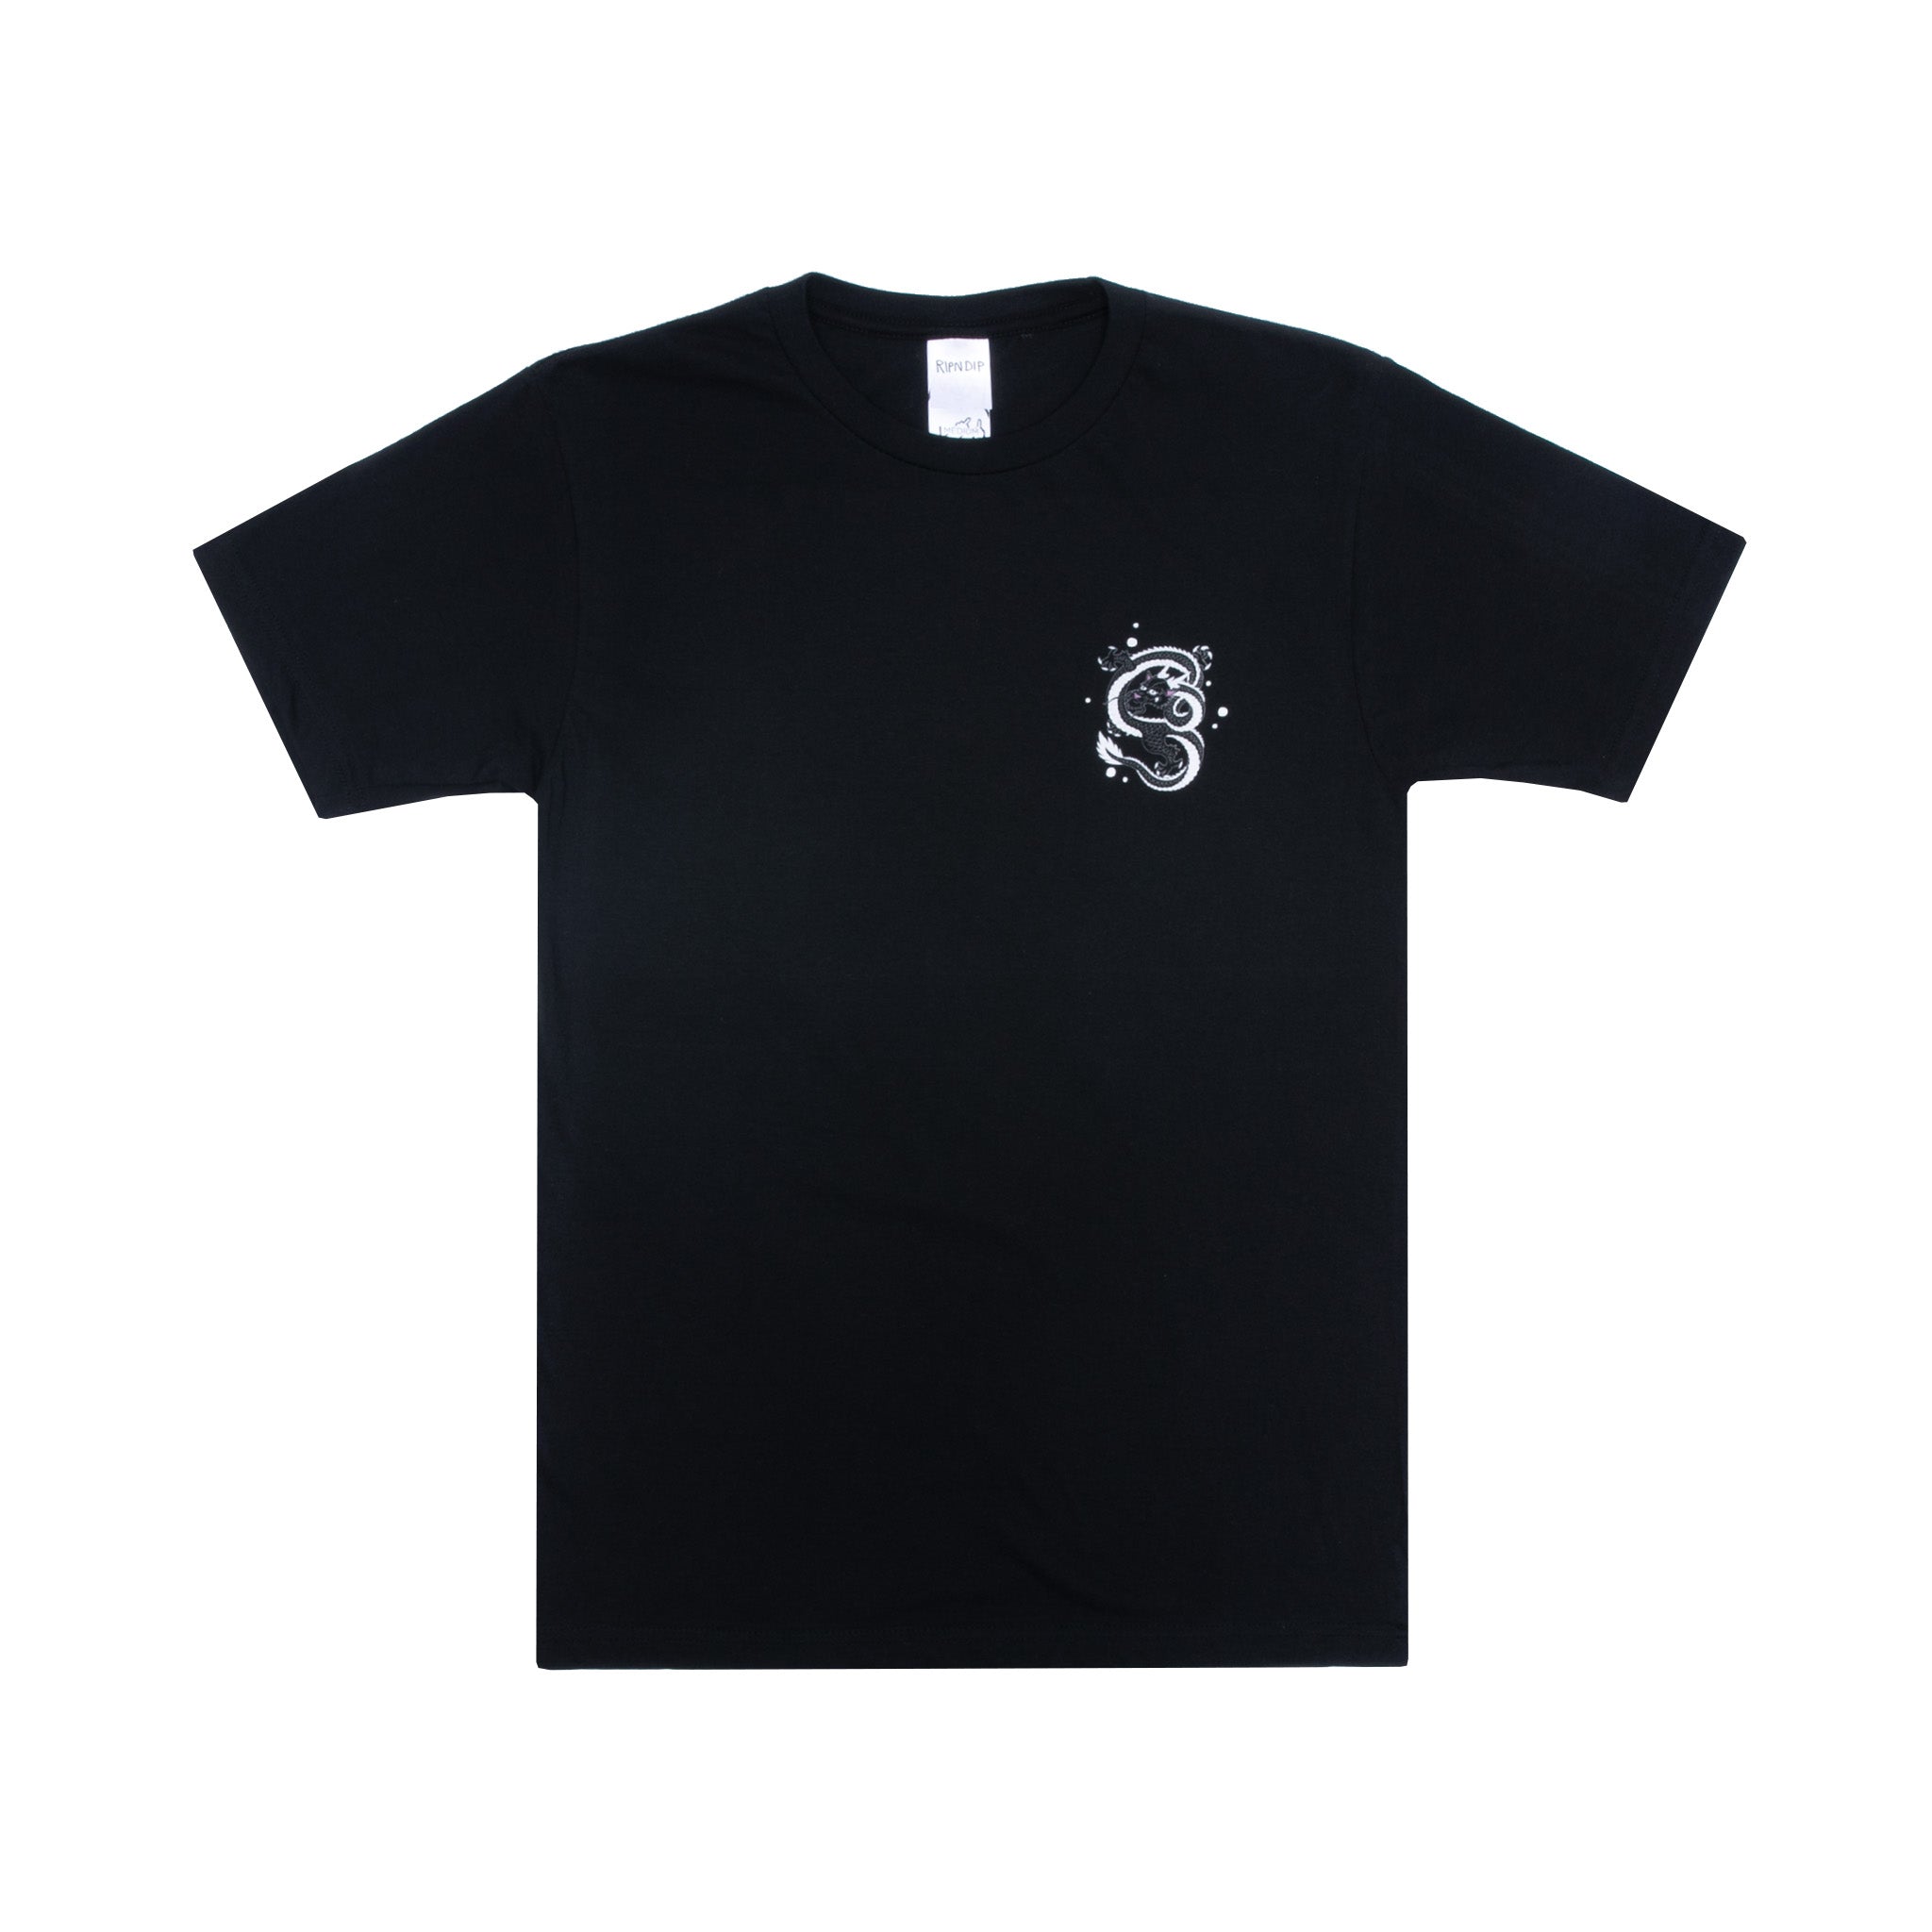 Ripndip Mystic Jerm T-Shirt in Black with Chest and Back Print